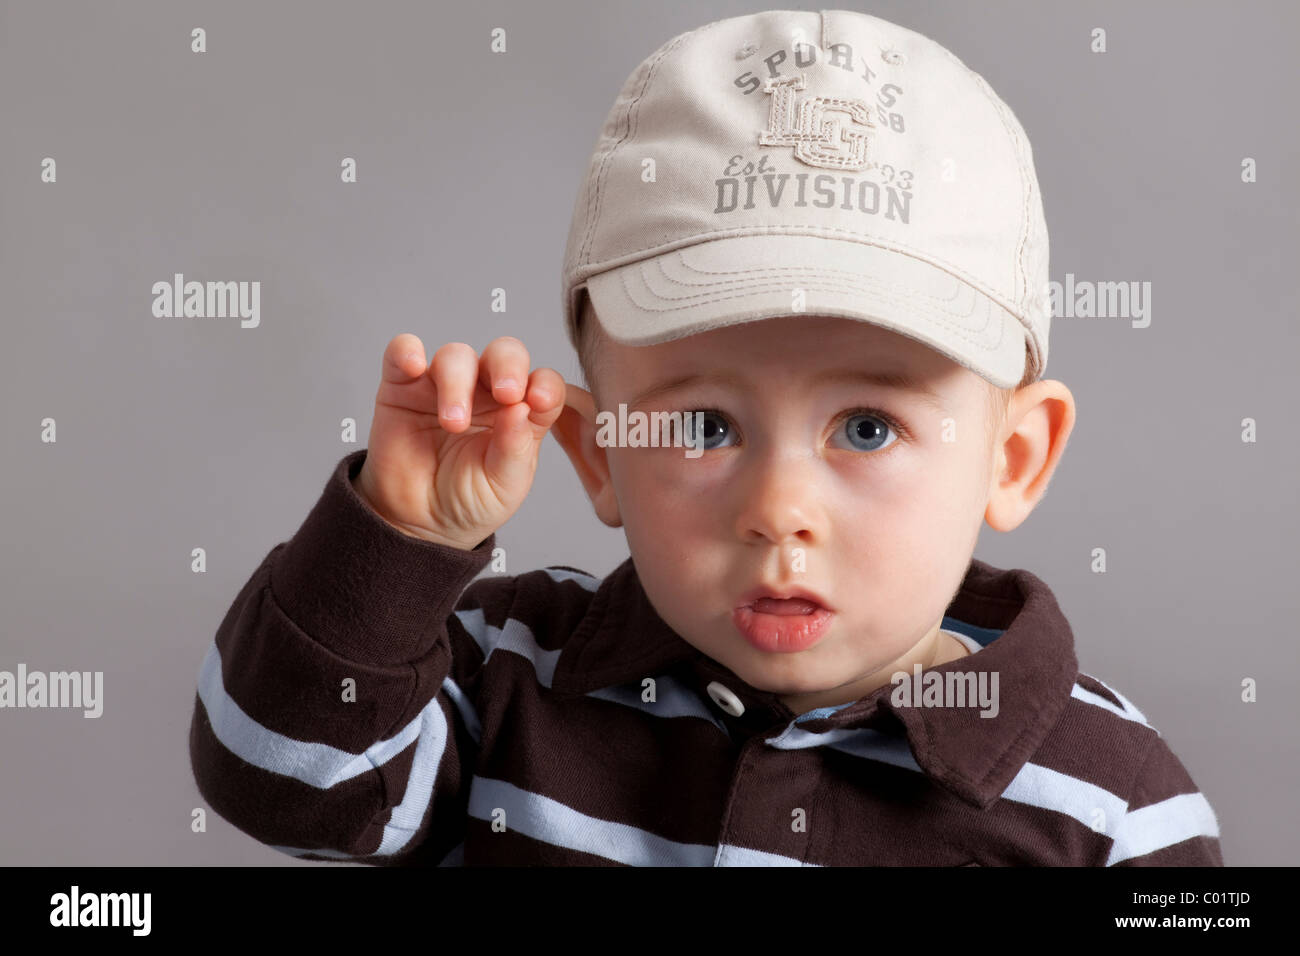 Baby with cap, boy, 8 months, portrait Stock Photo